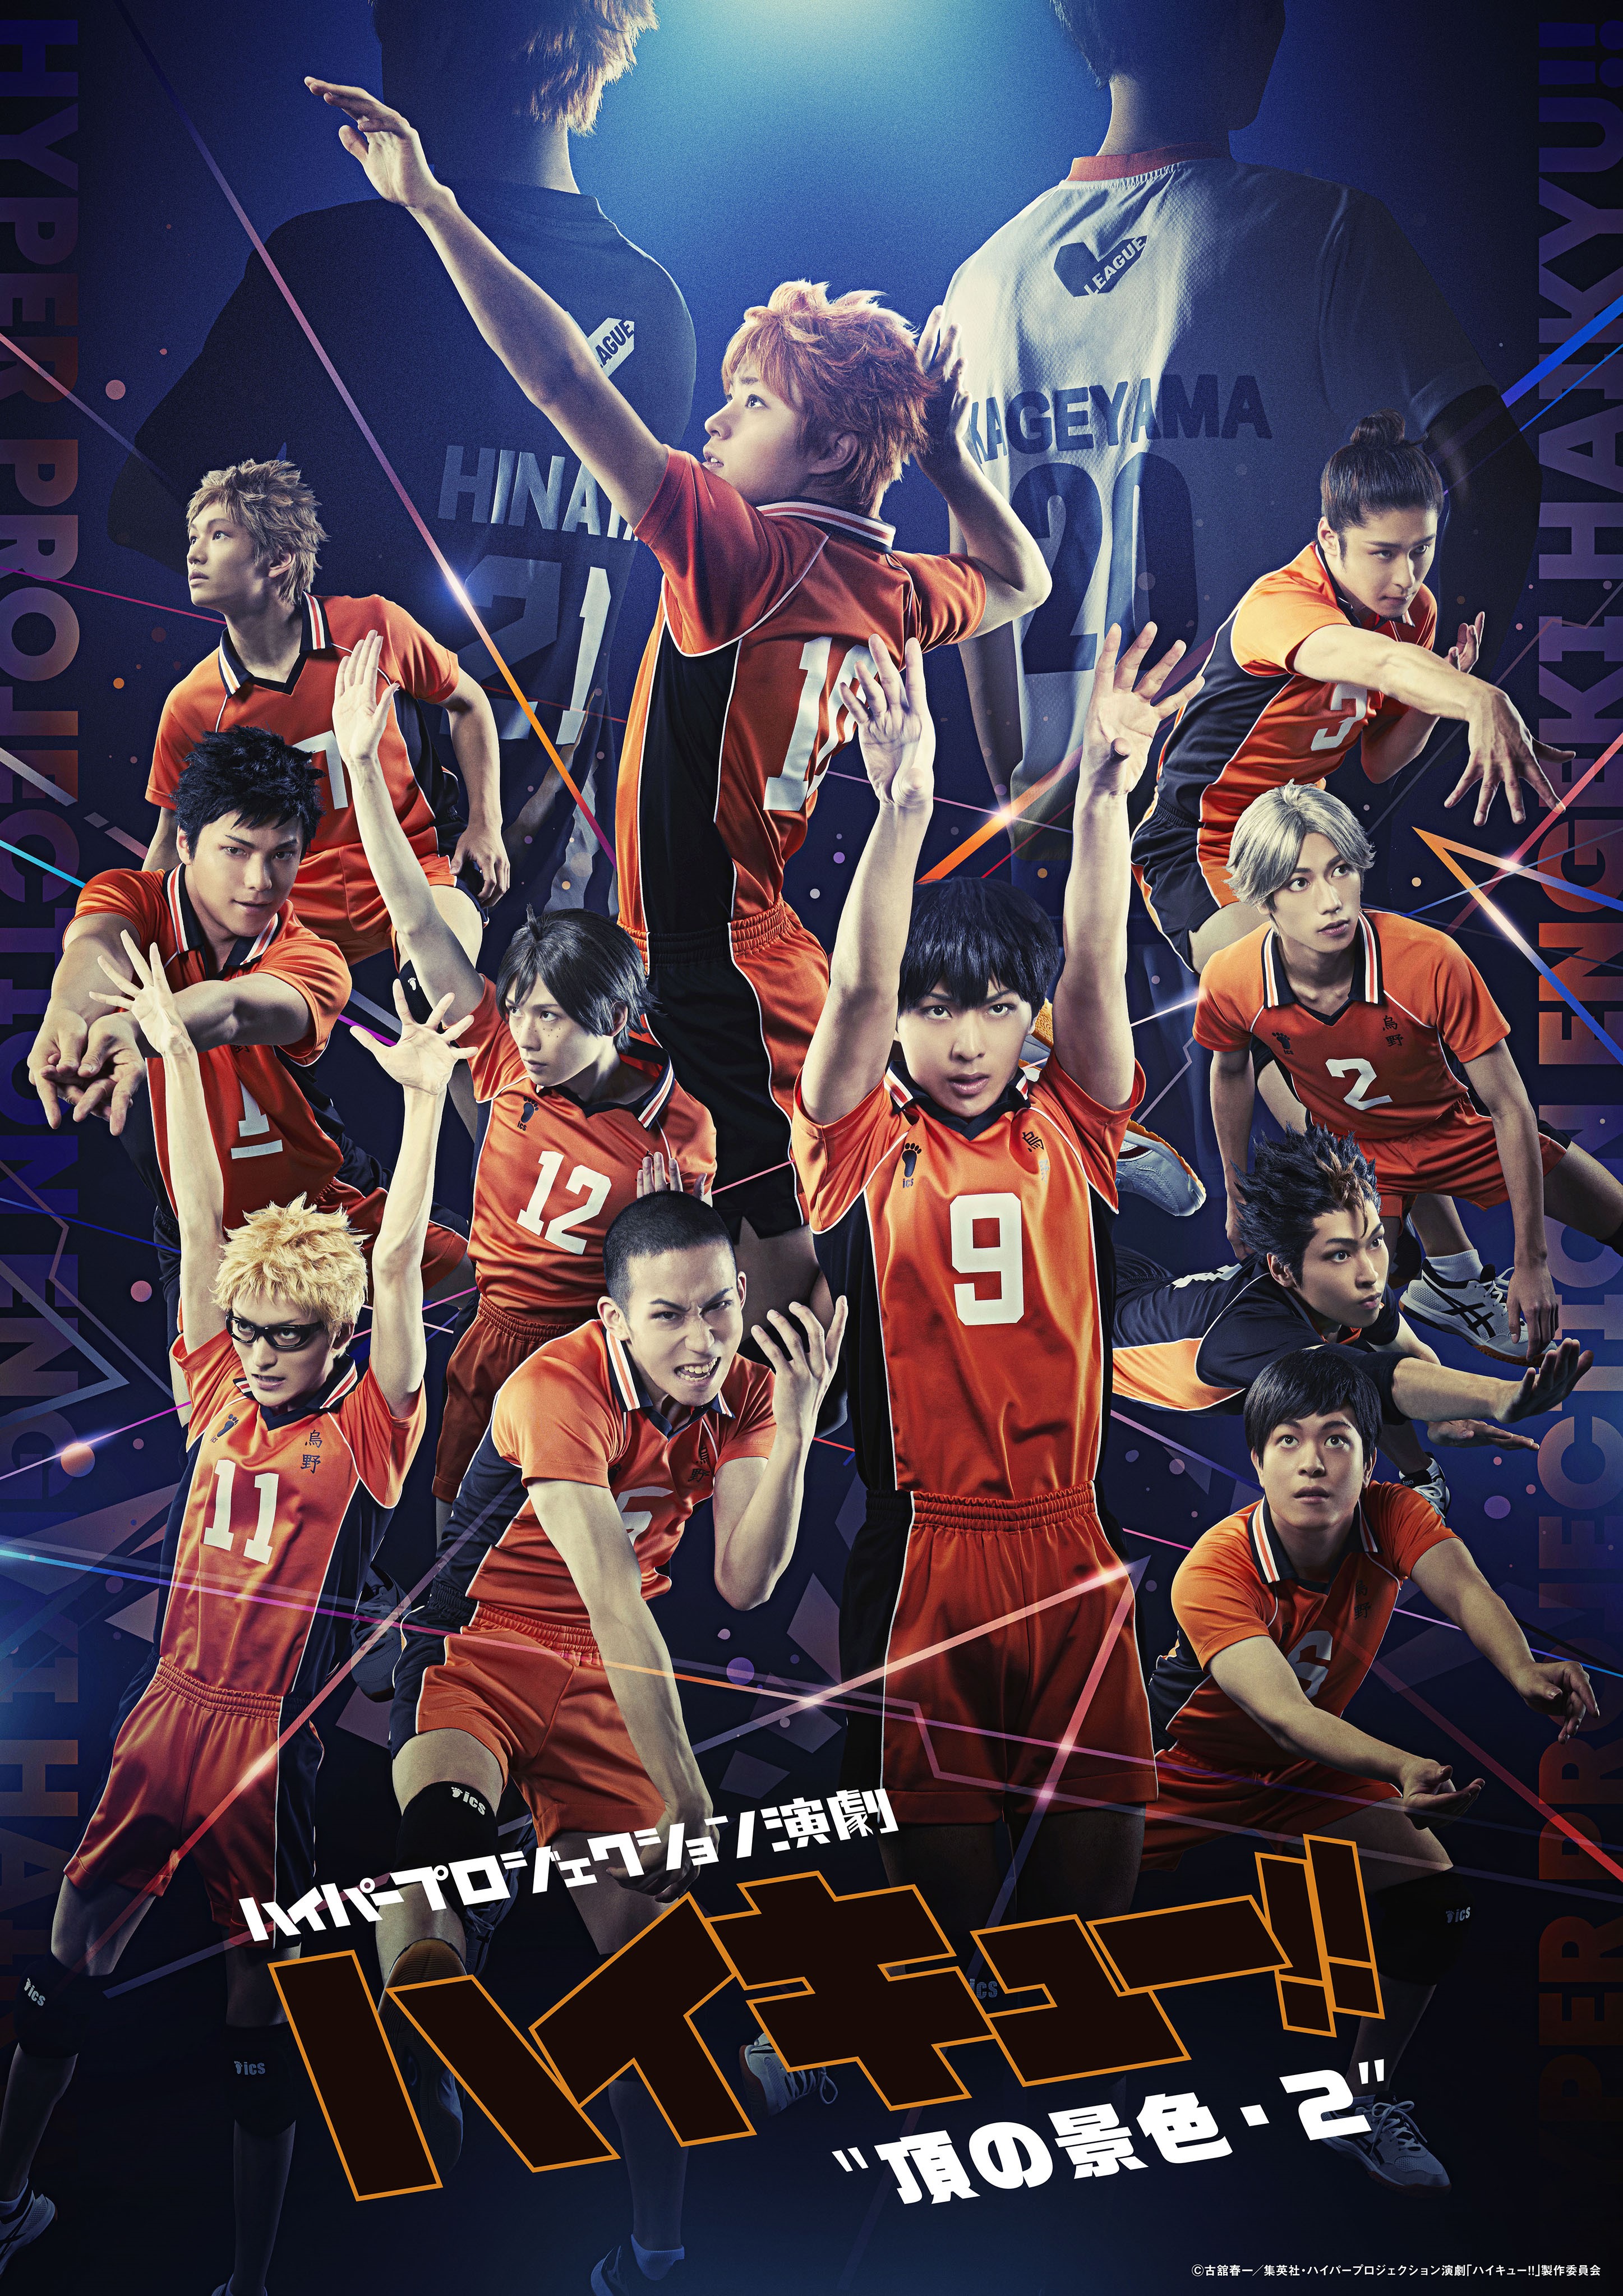 Haikyu!! To the Top Reaches New Heights in Key Visual